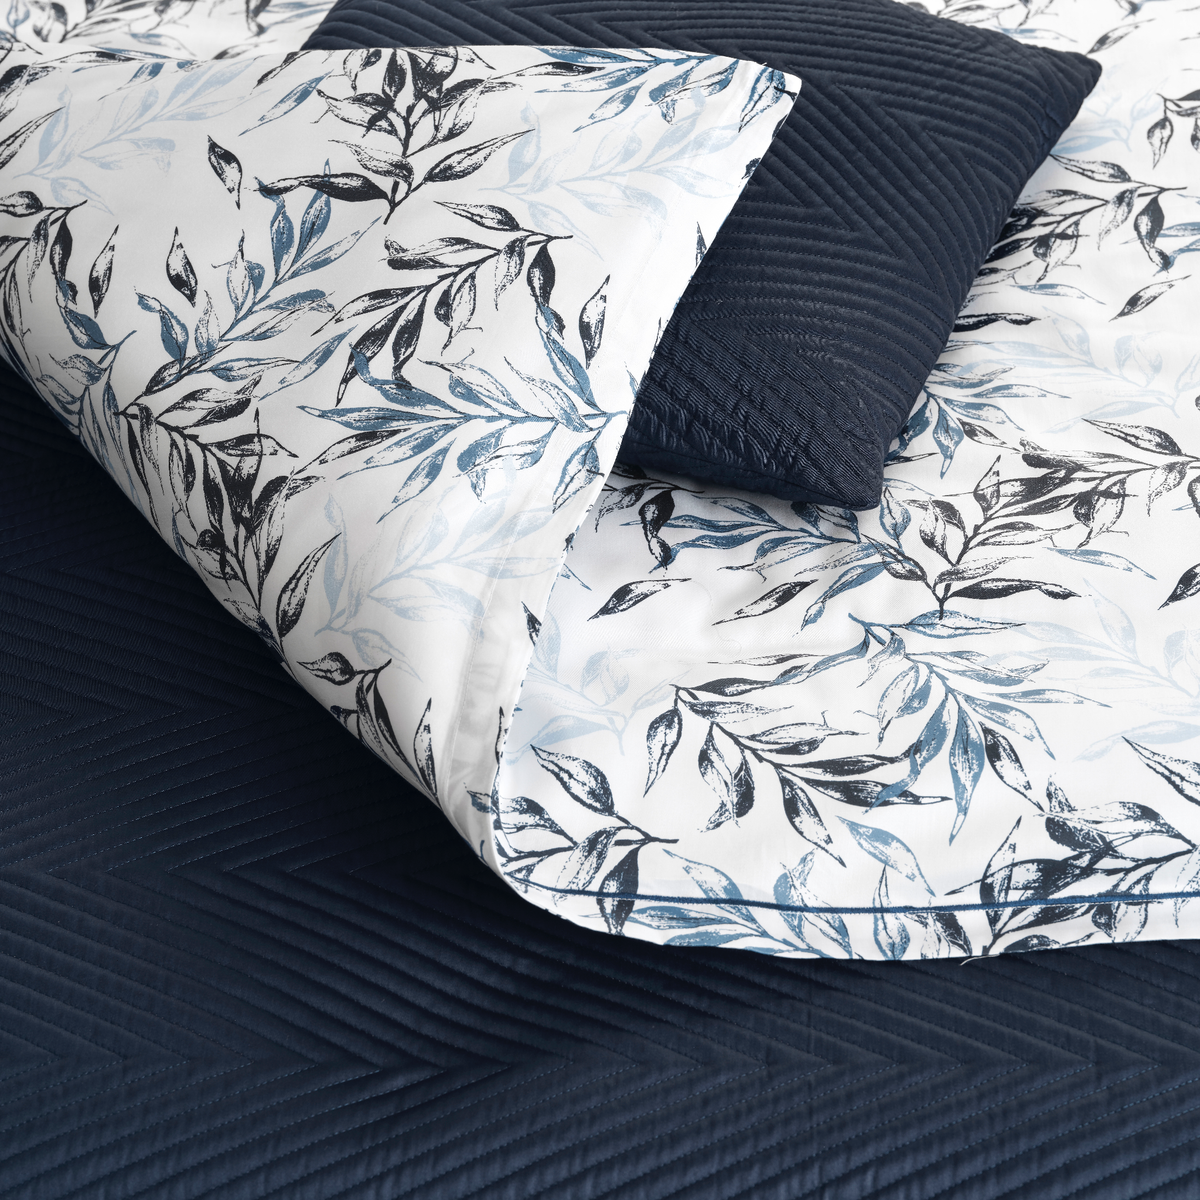 Detail View of Signoria Natura Duvet Cover in Blue Color